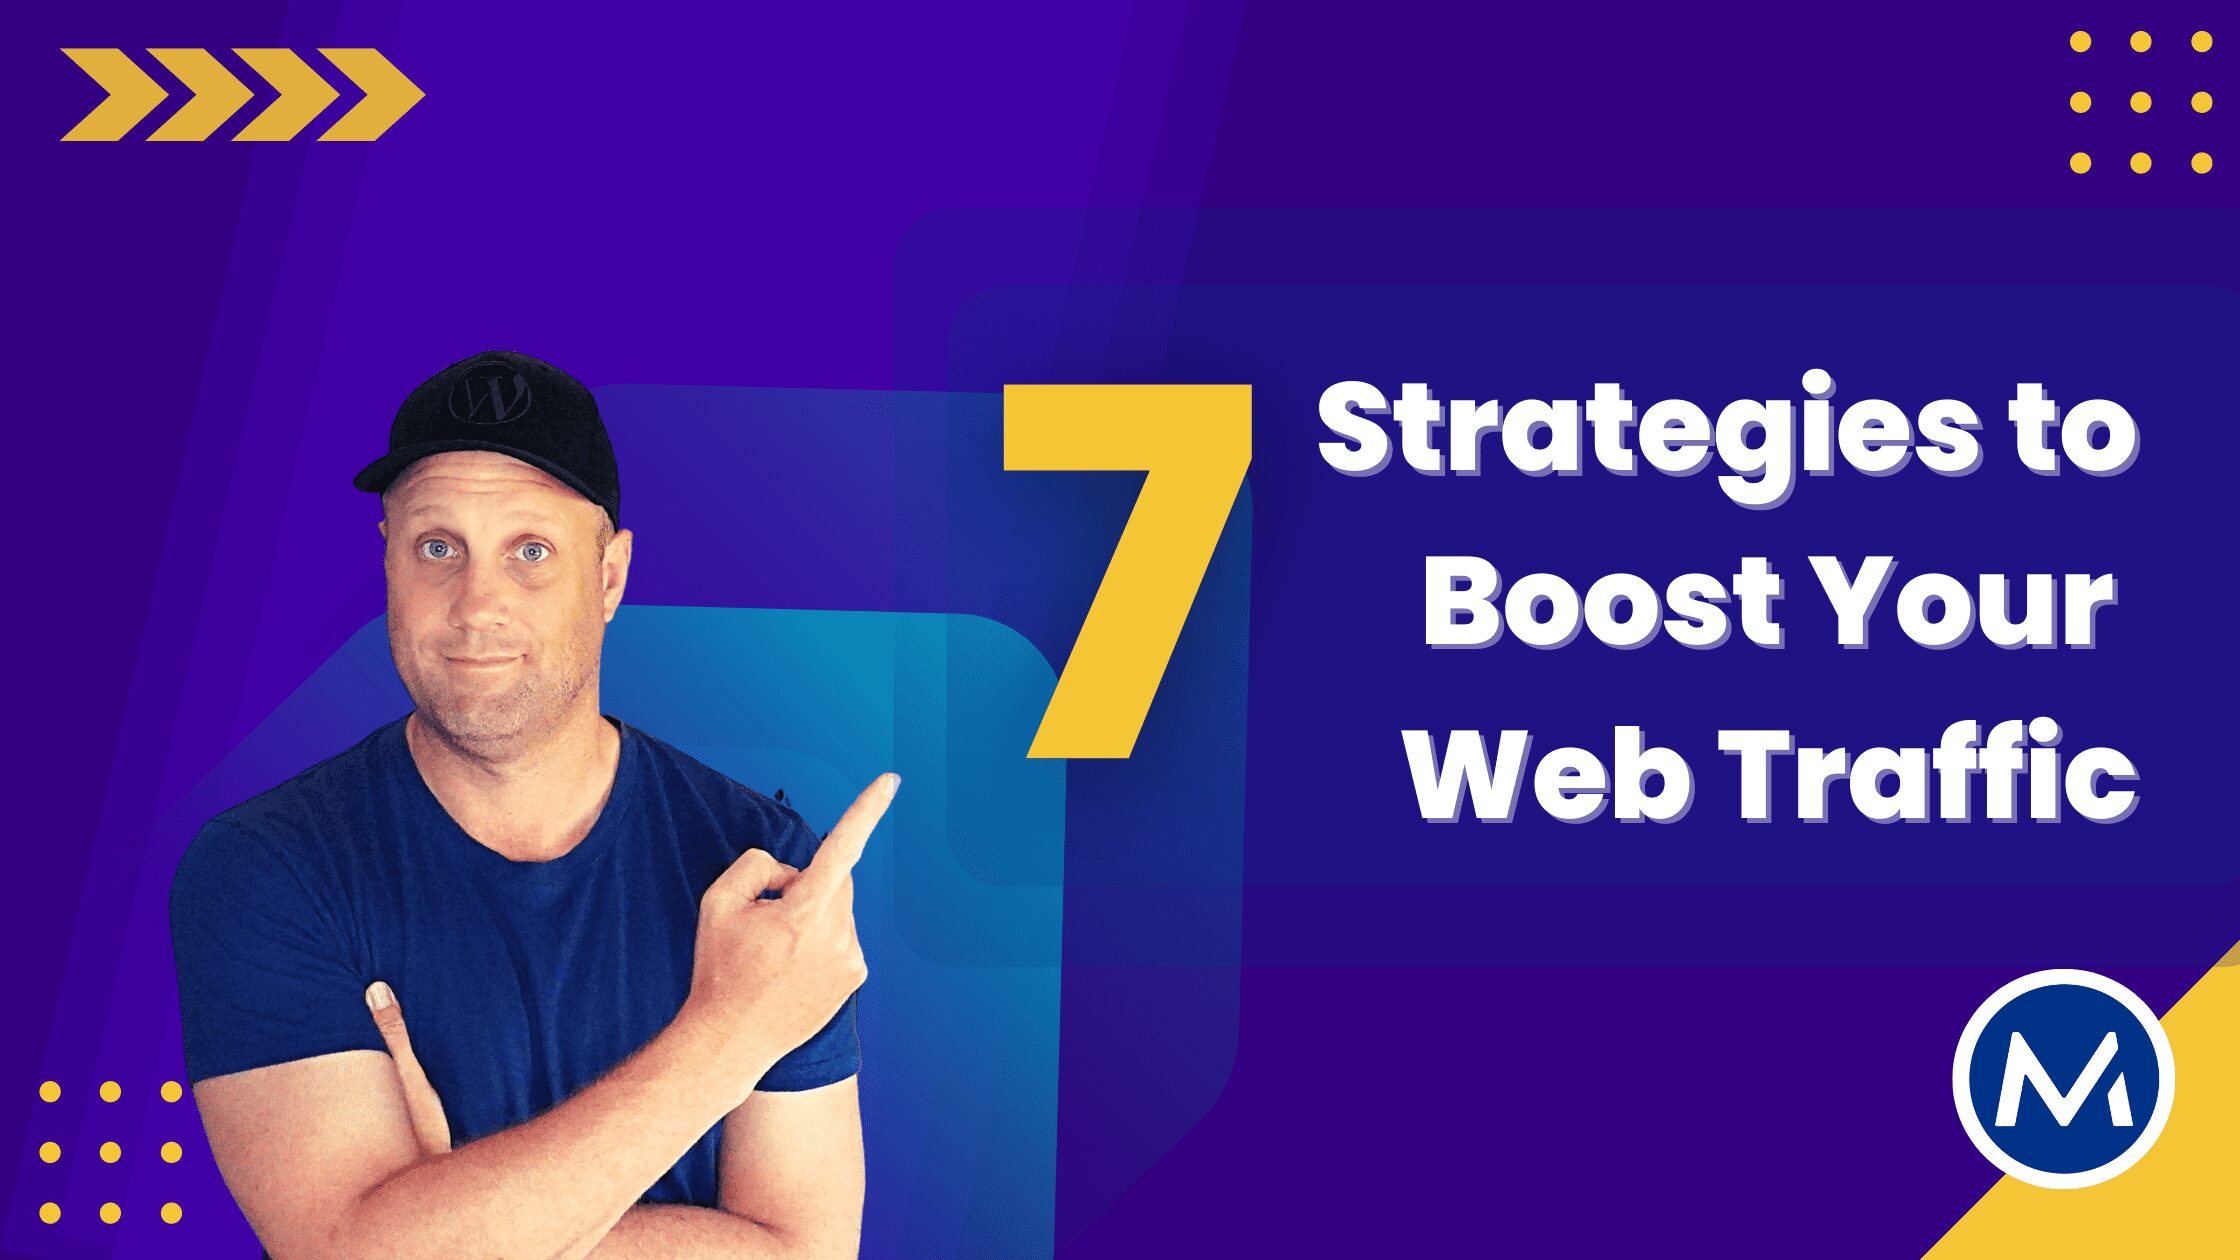 7 Strategies to Boost Your Web Traffic